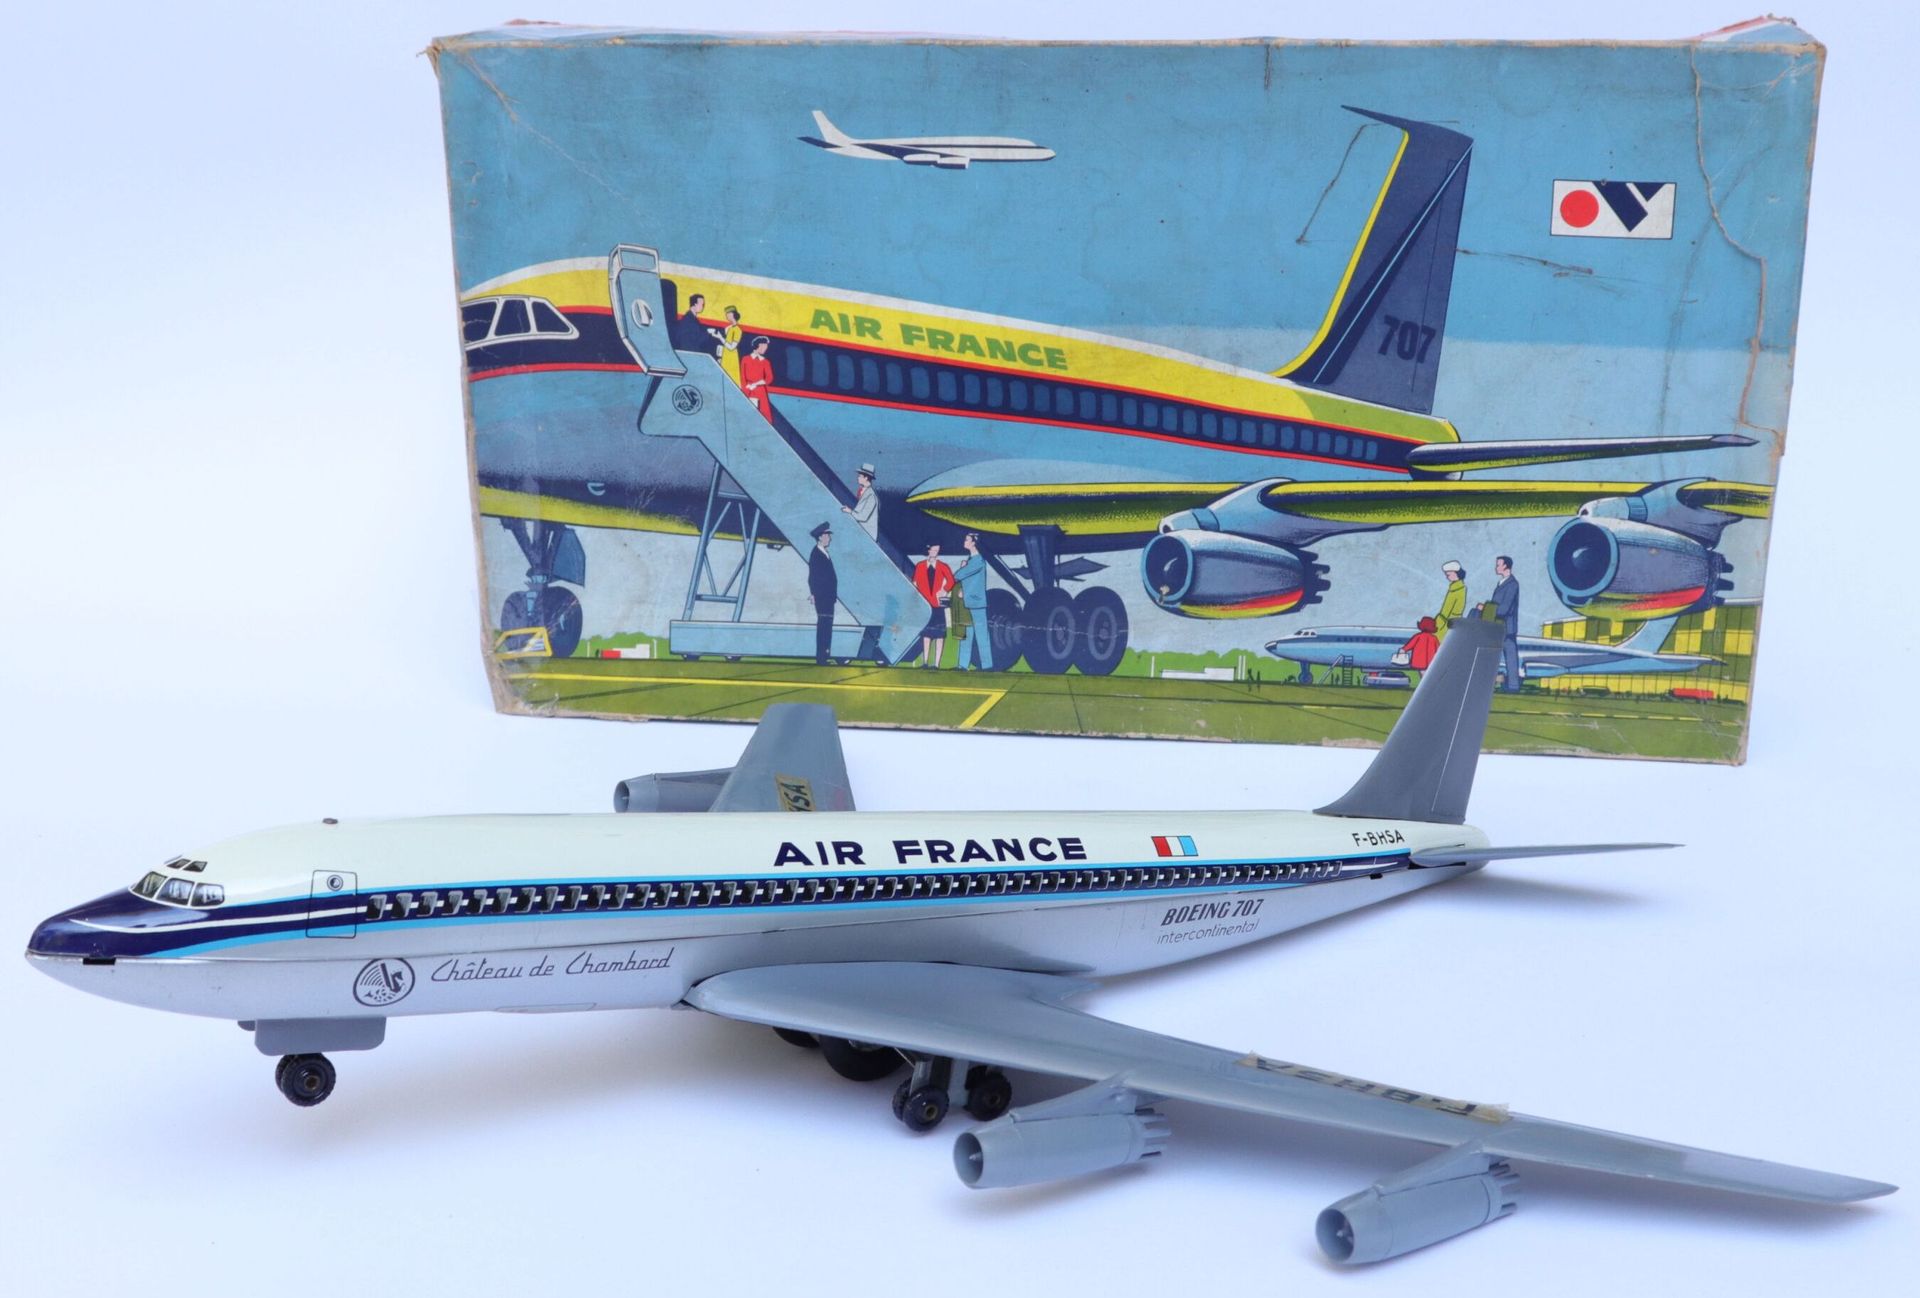 Null BOEING B-707 Intercontinental AIR FRANCE.

MONT BLANC toy plane in lithogra&hellip;